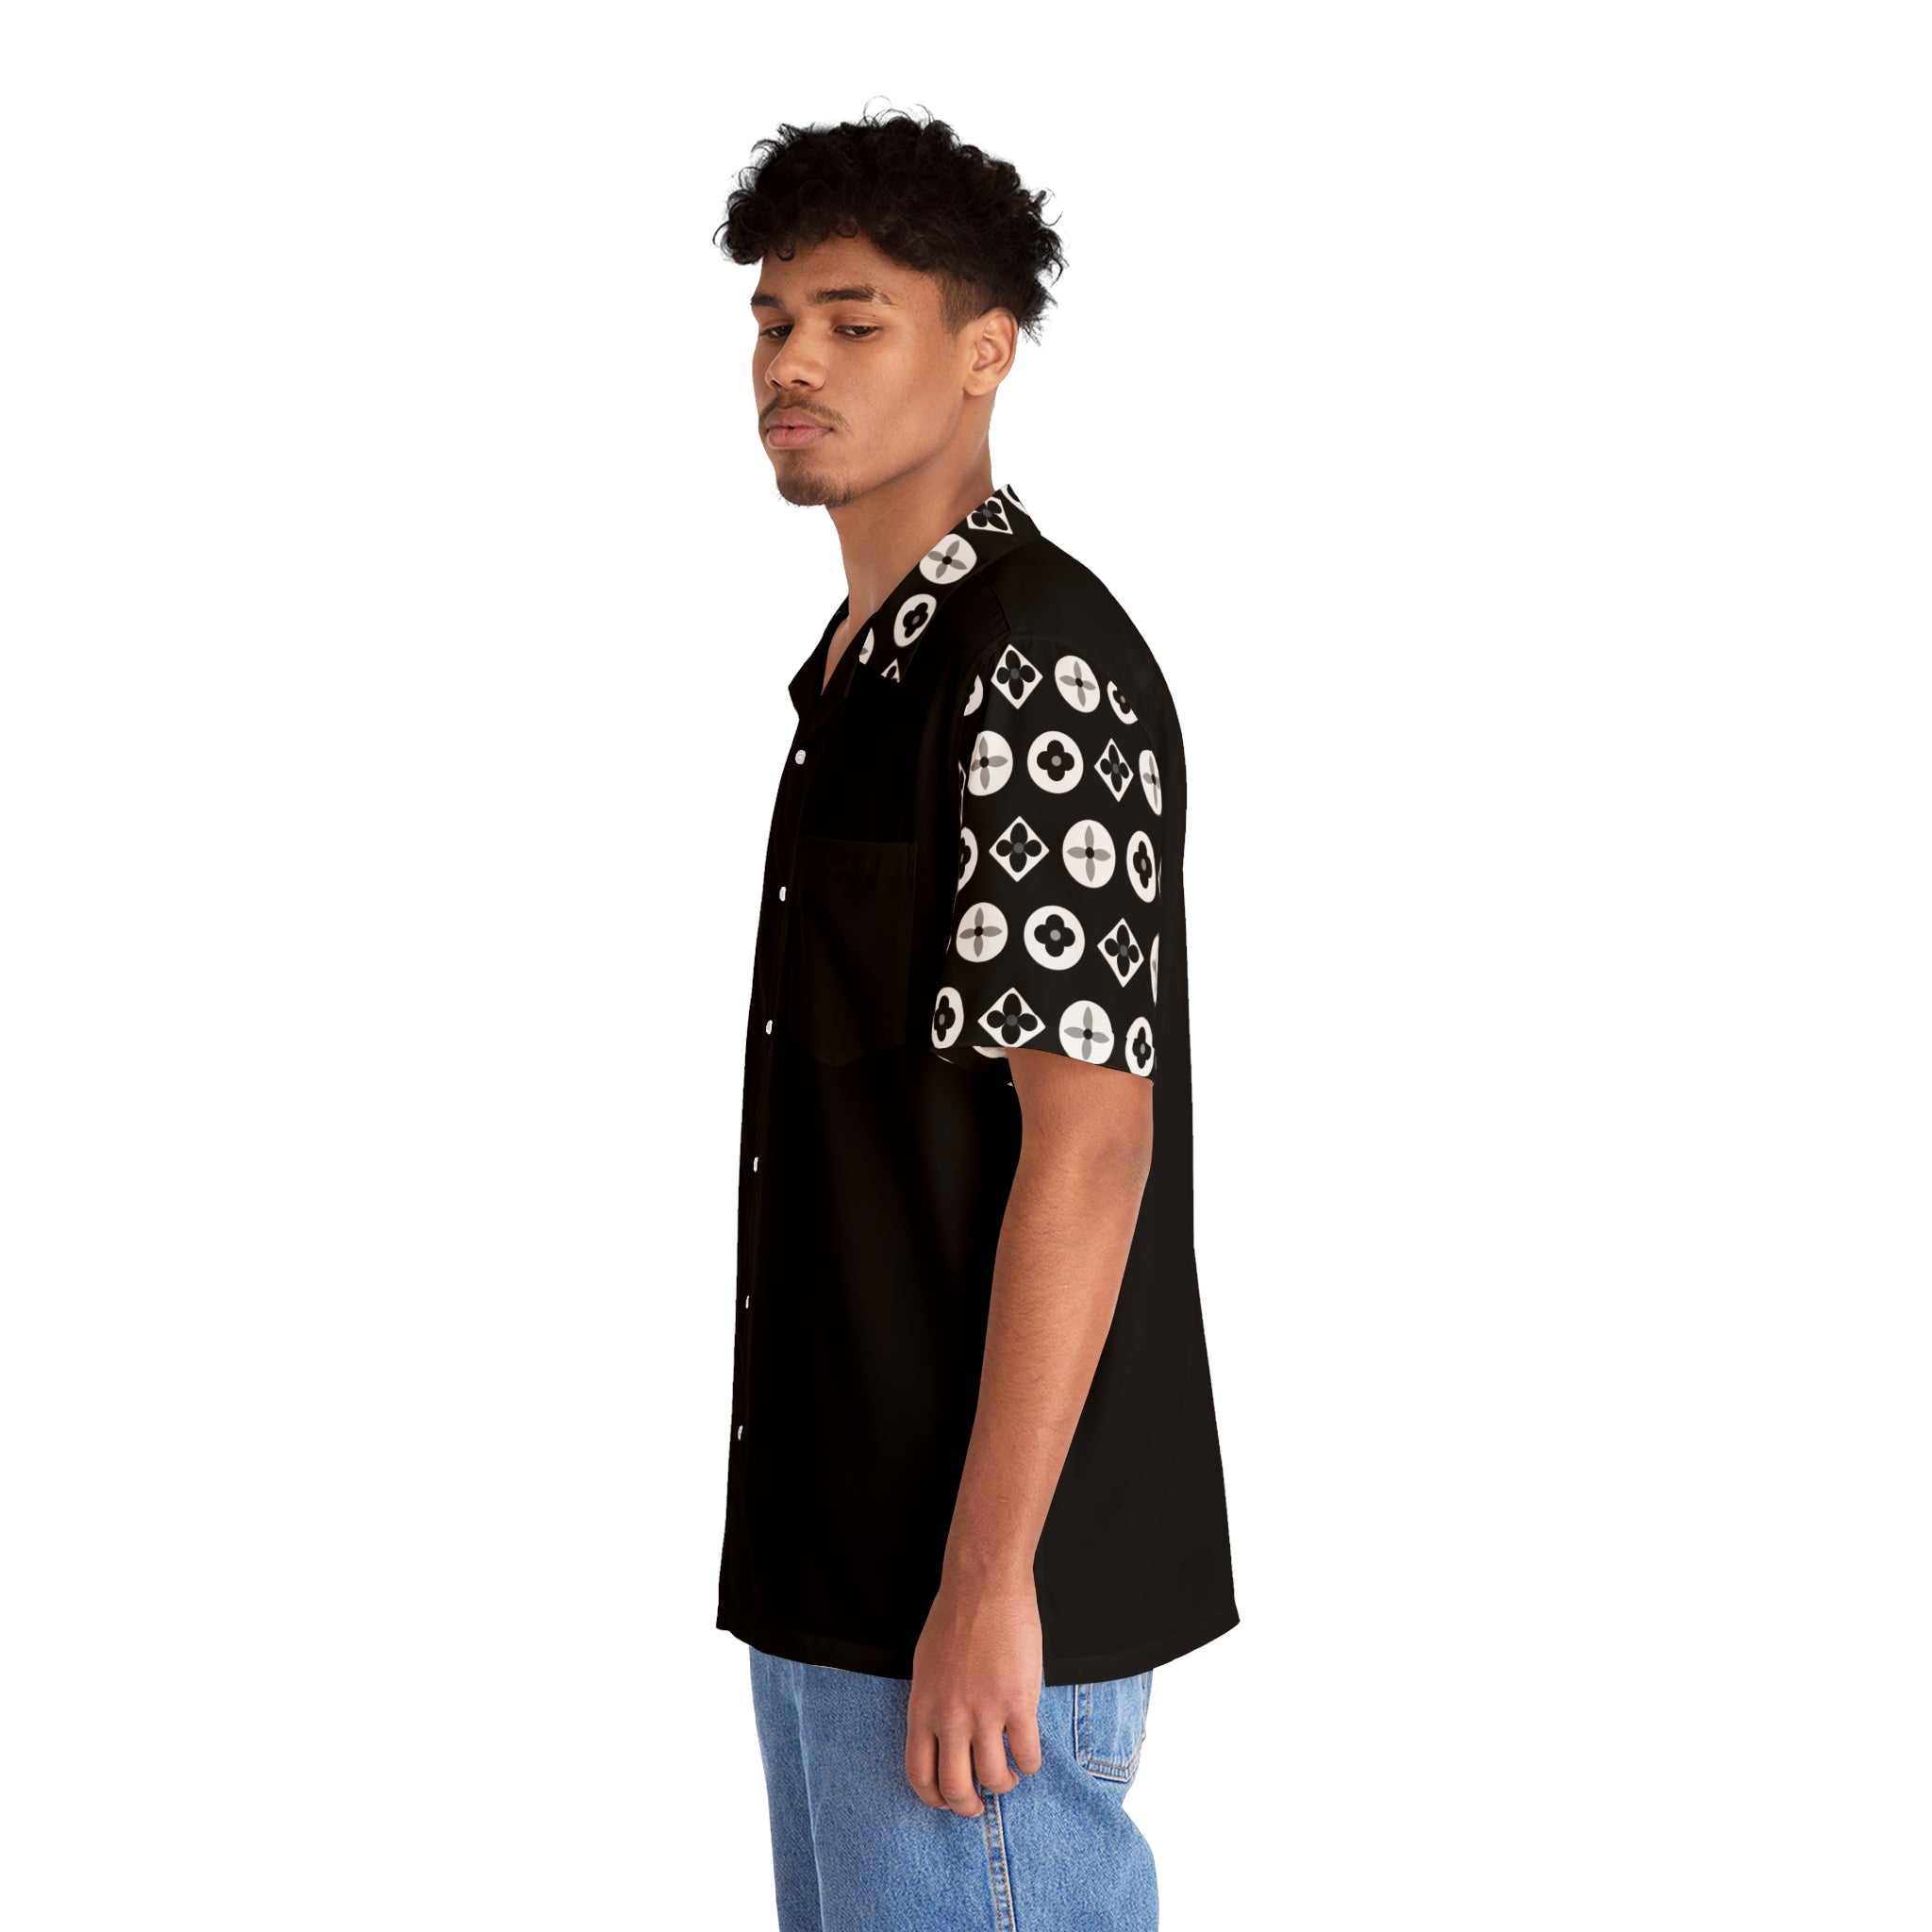 Groove Collection Trilogy of Icons Solid Block (Black, White) Unisex Gender Neutral Black Button Up Shirt, Hawaiian Shirt